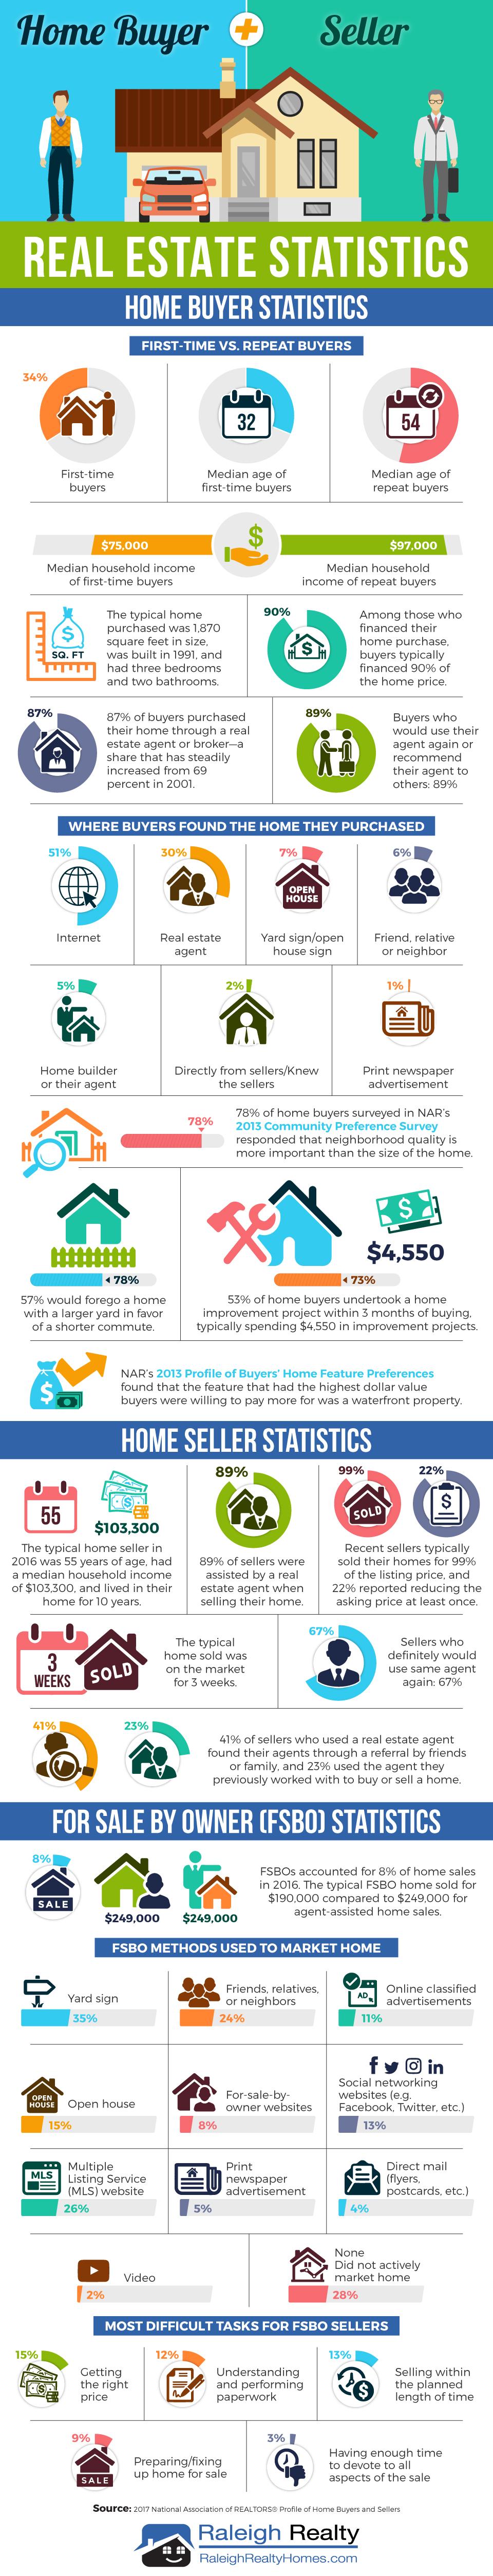 Real Estate Statistics: Home Buyers and Sellers